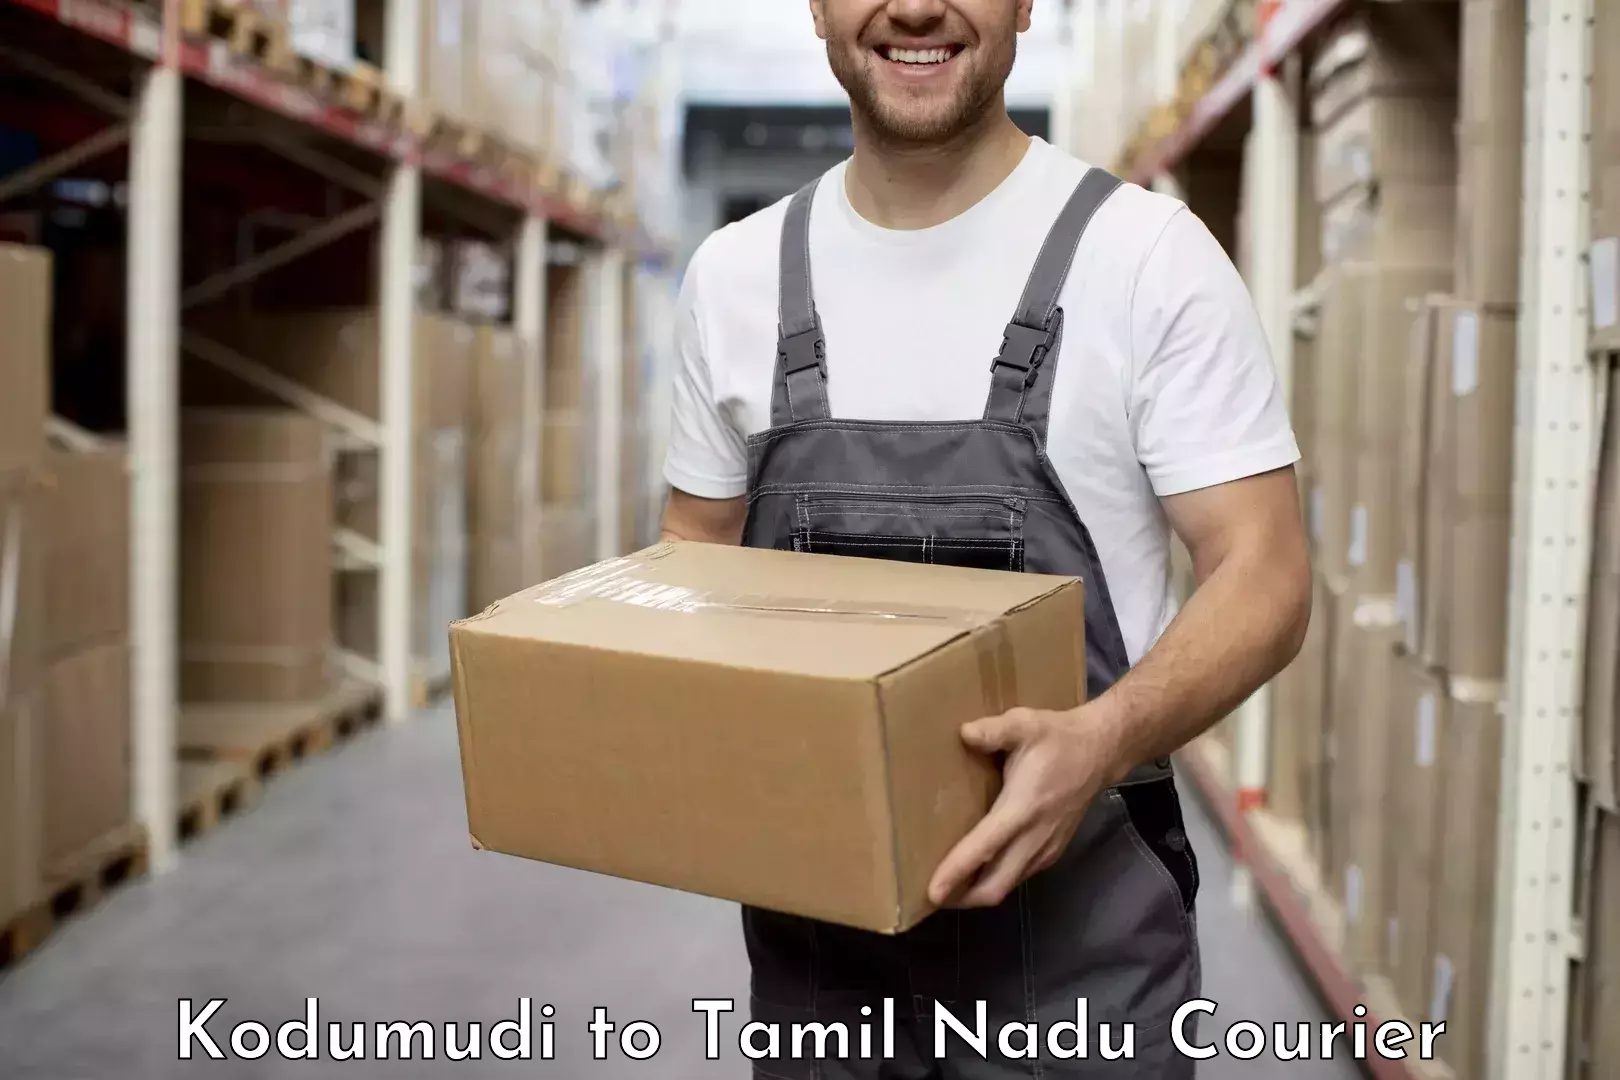 24-hour courier services Kodumudi to Ennore Port Chennai